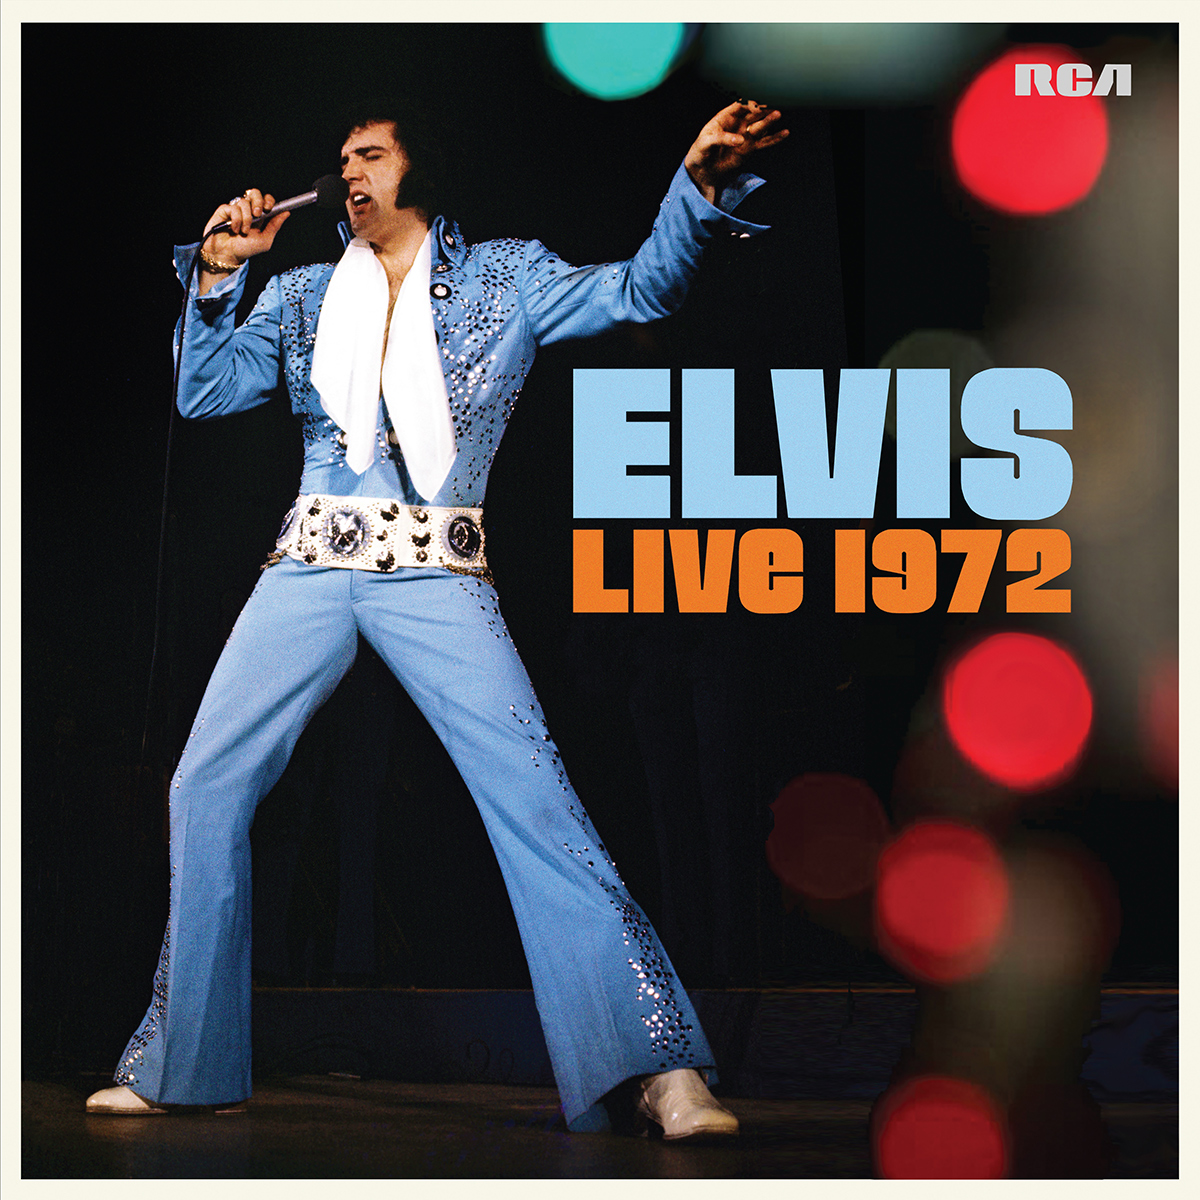 Elvis Live 1972' Out Now On Vinyl! - Legacy Recordings